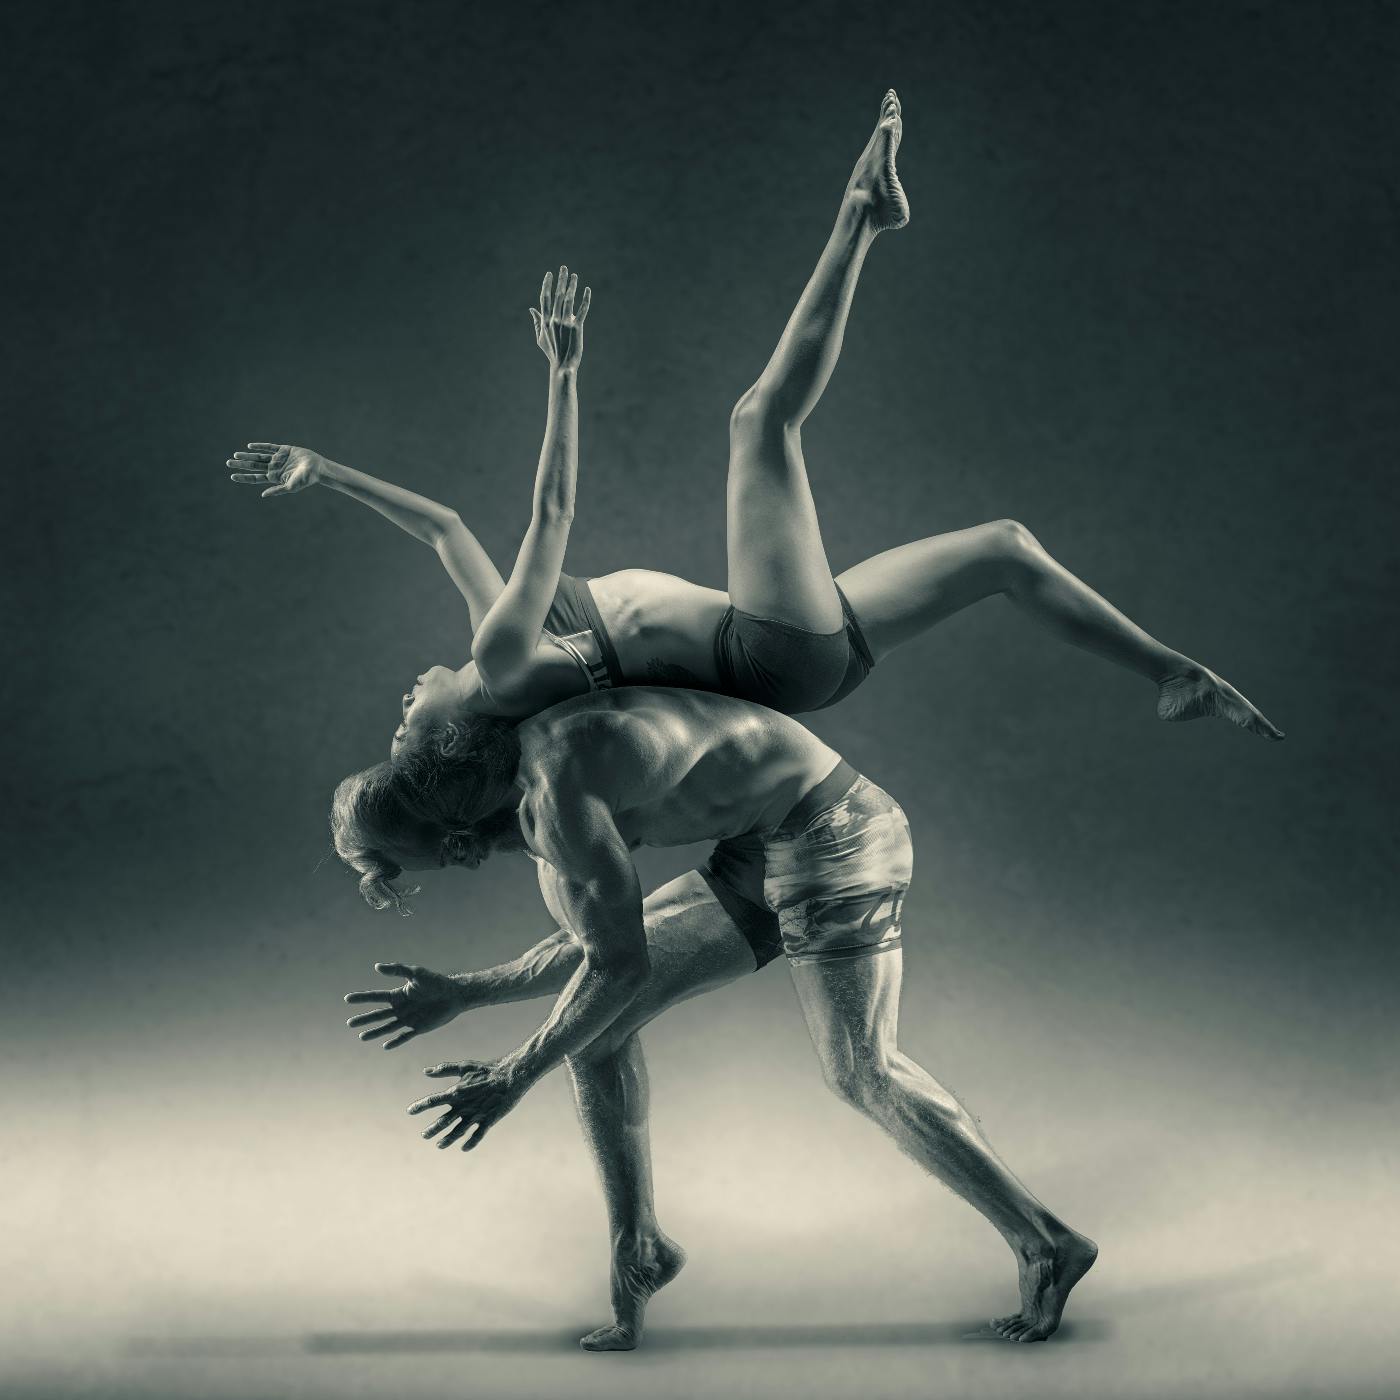 A male dancer crouched, supporting a female dancer on his back.